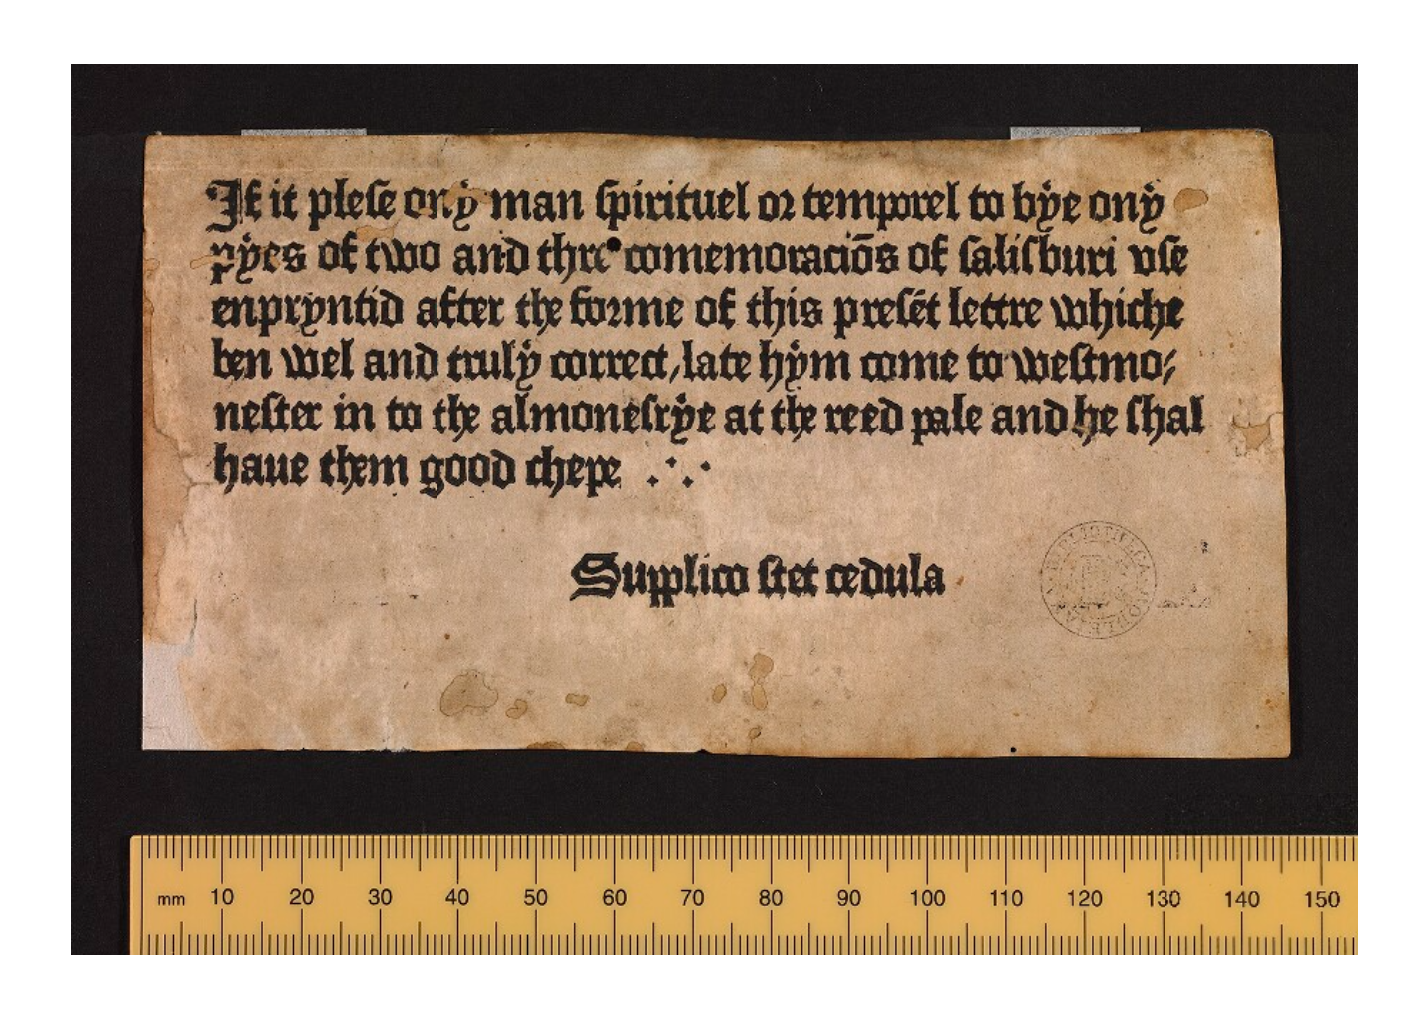 This is the first ever print ad. It was an ad for the Sarum Ordinal and was printed by William Caxton.